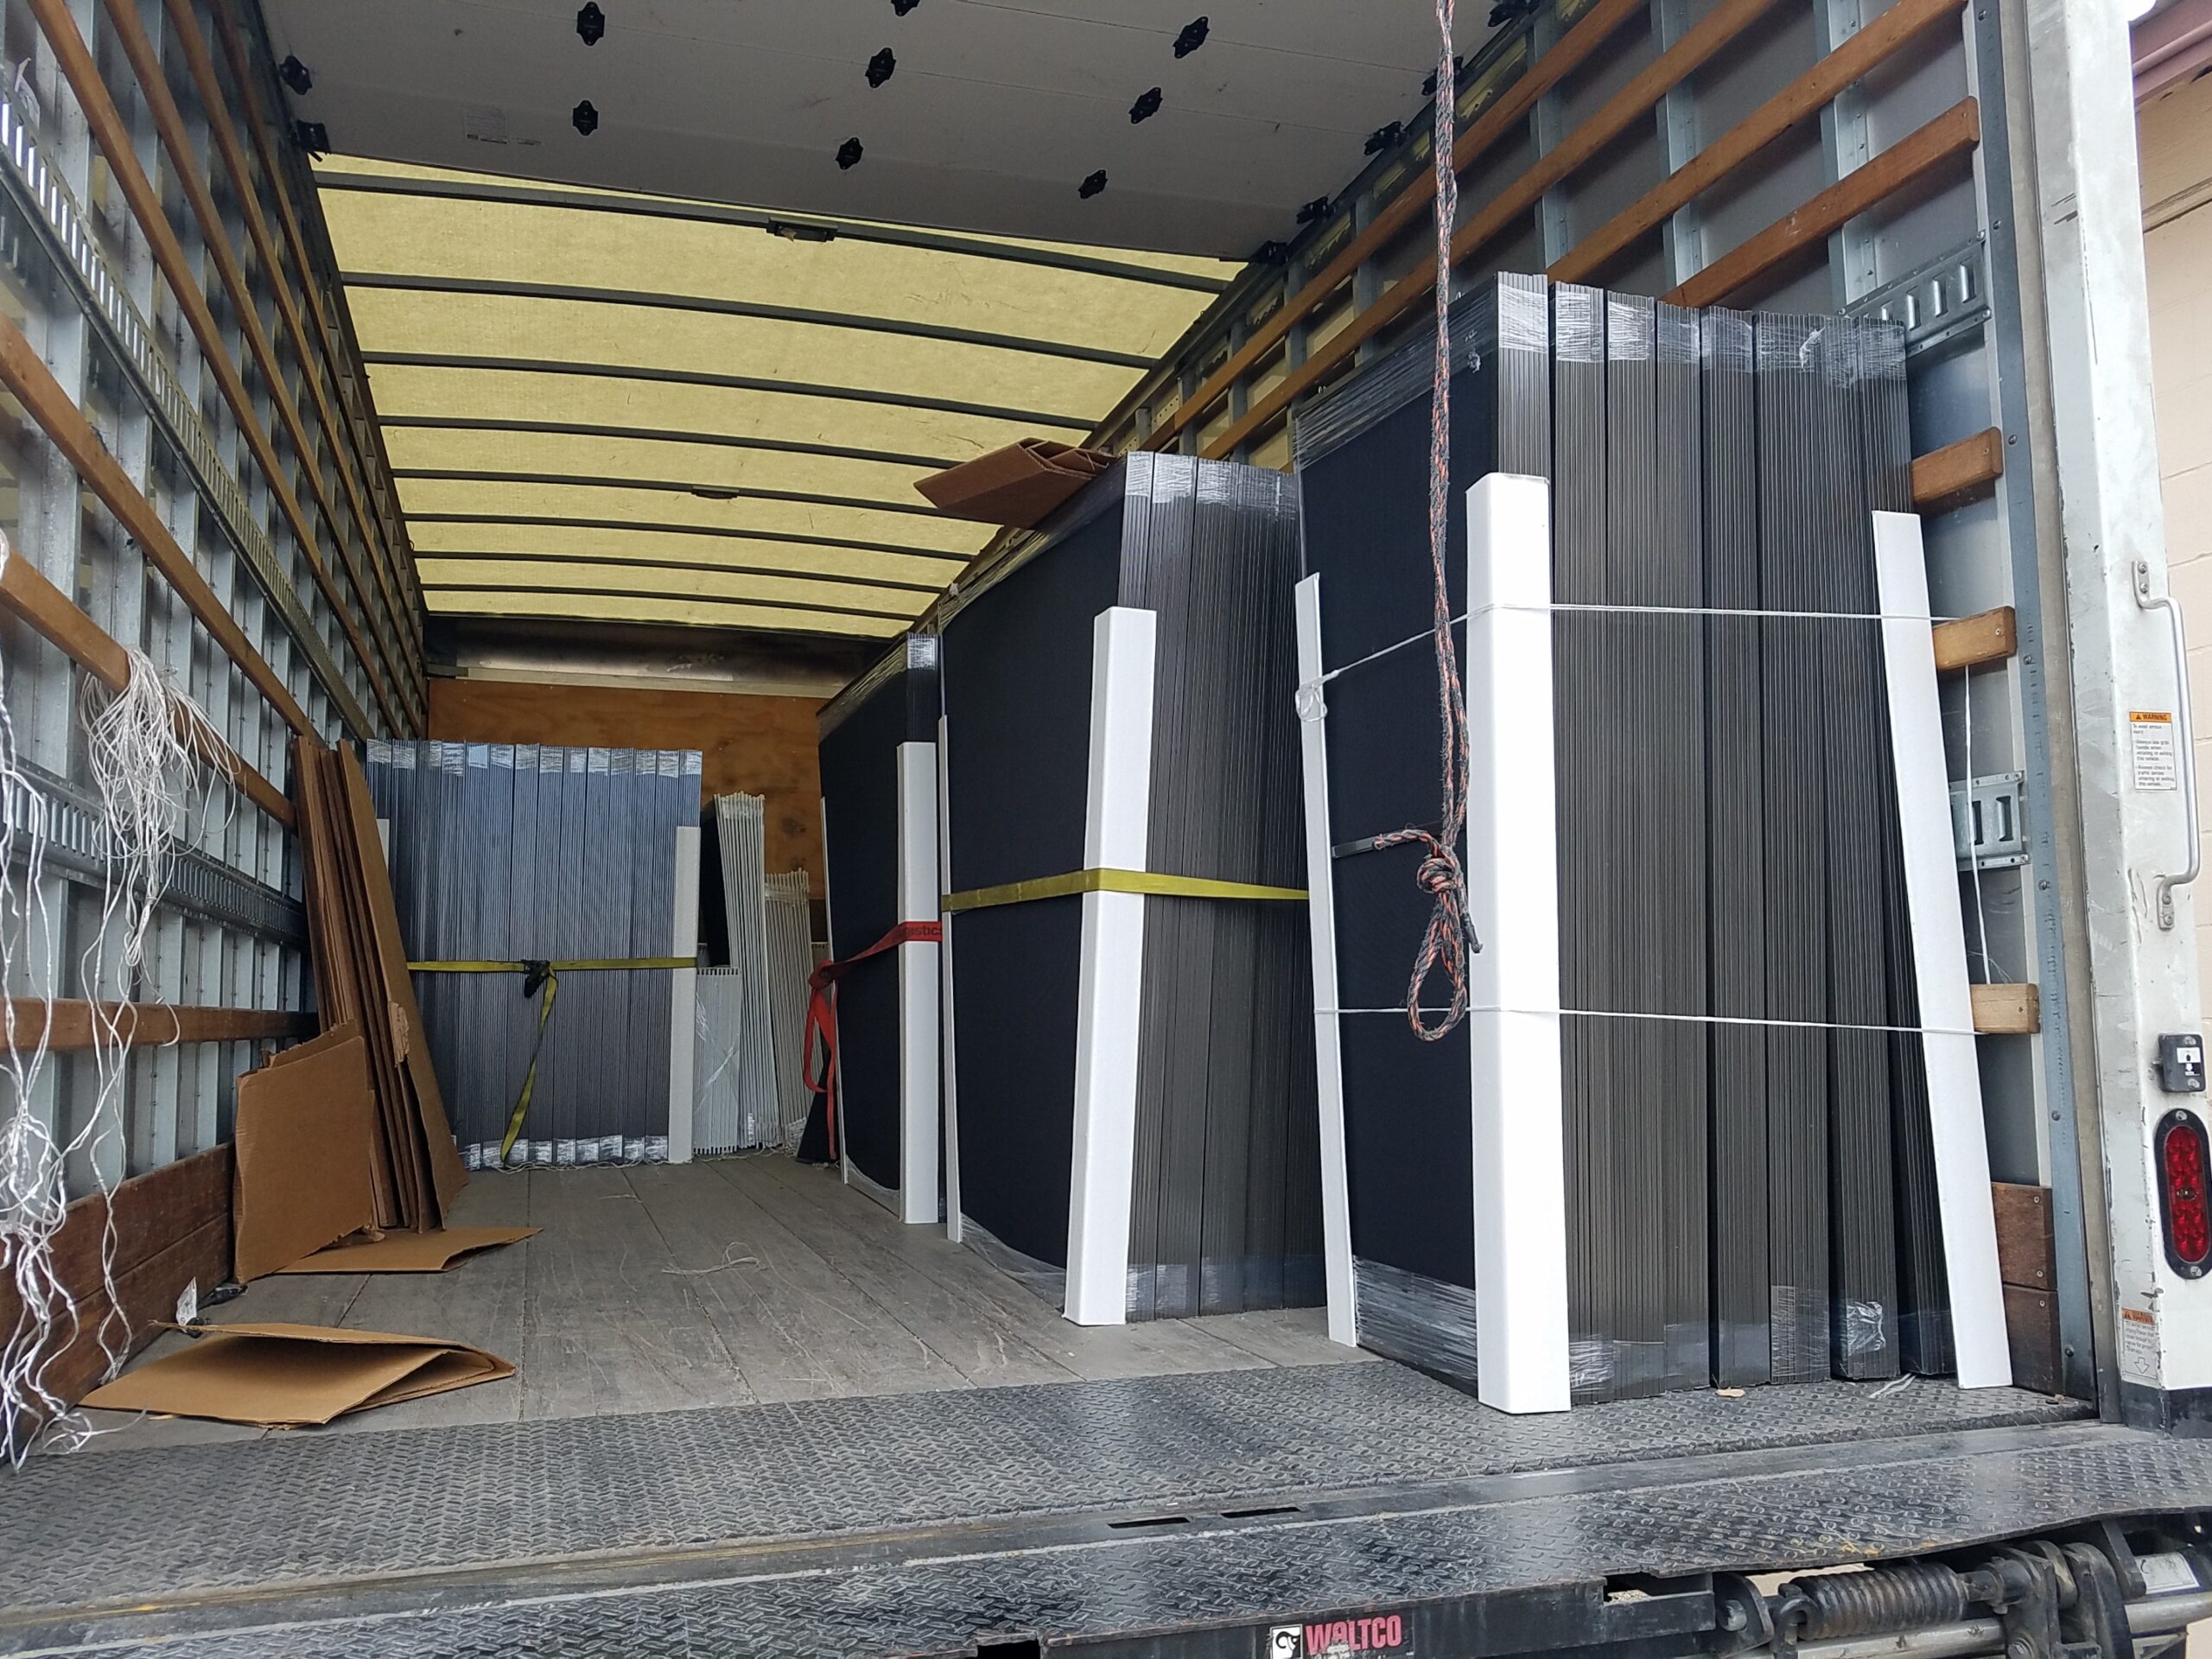 Truck loaded with solar screens from apartment install.